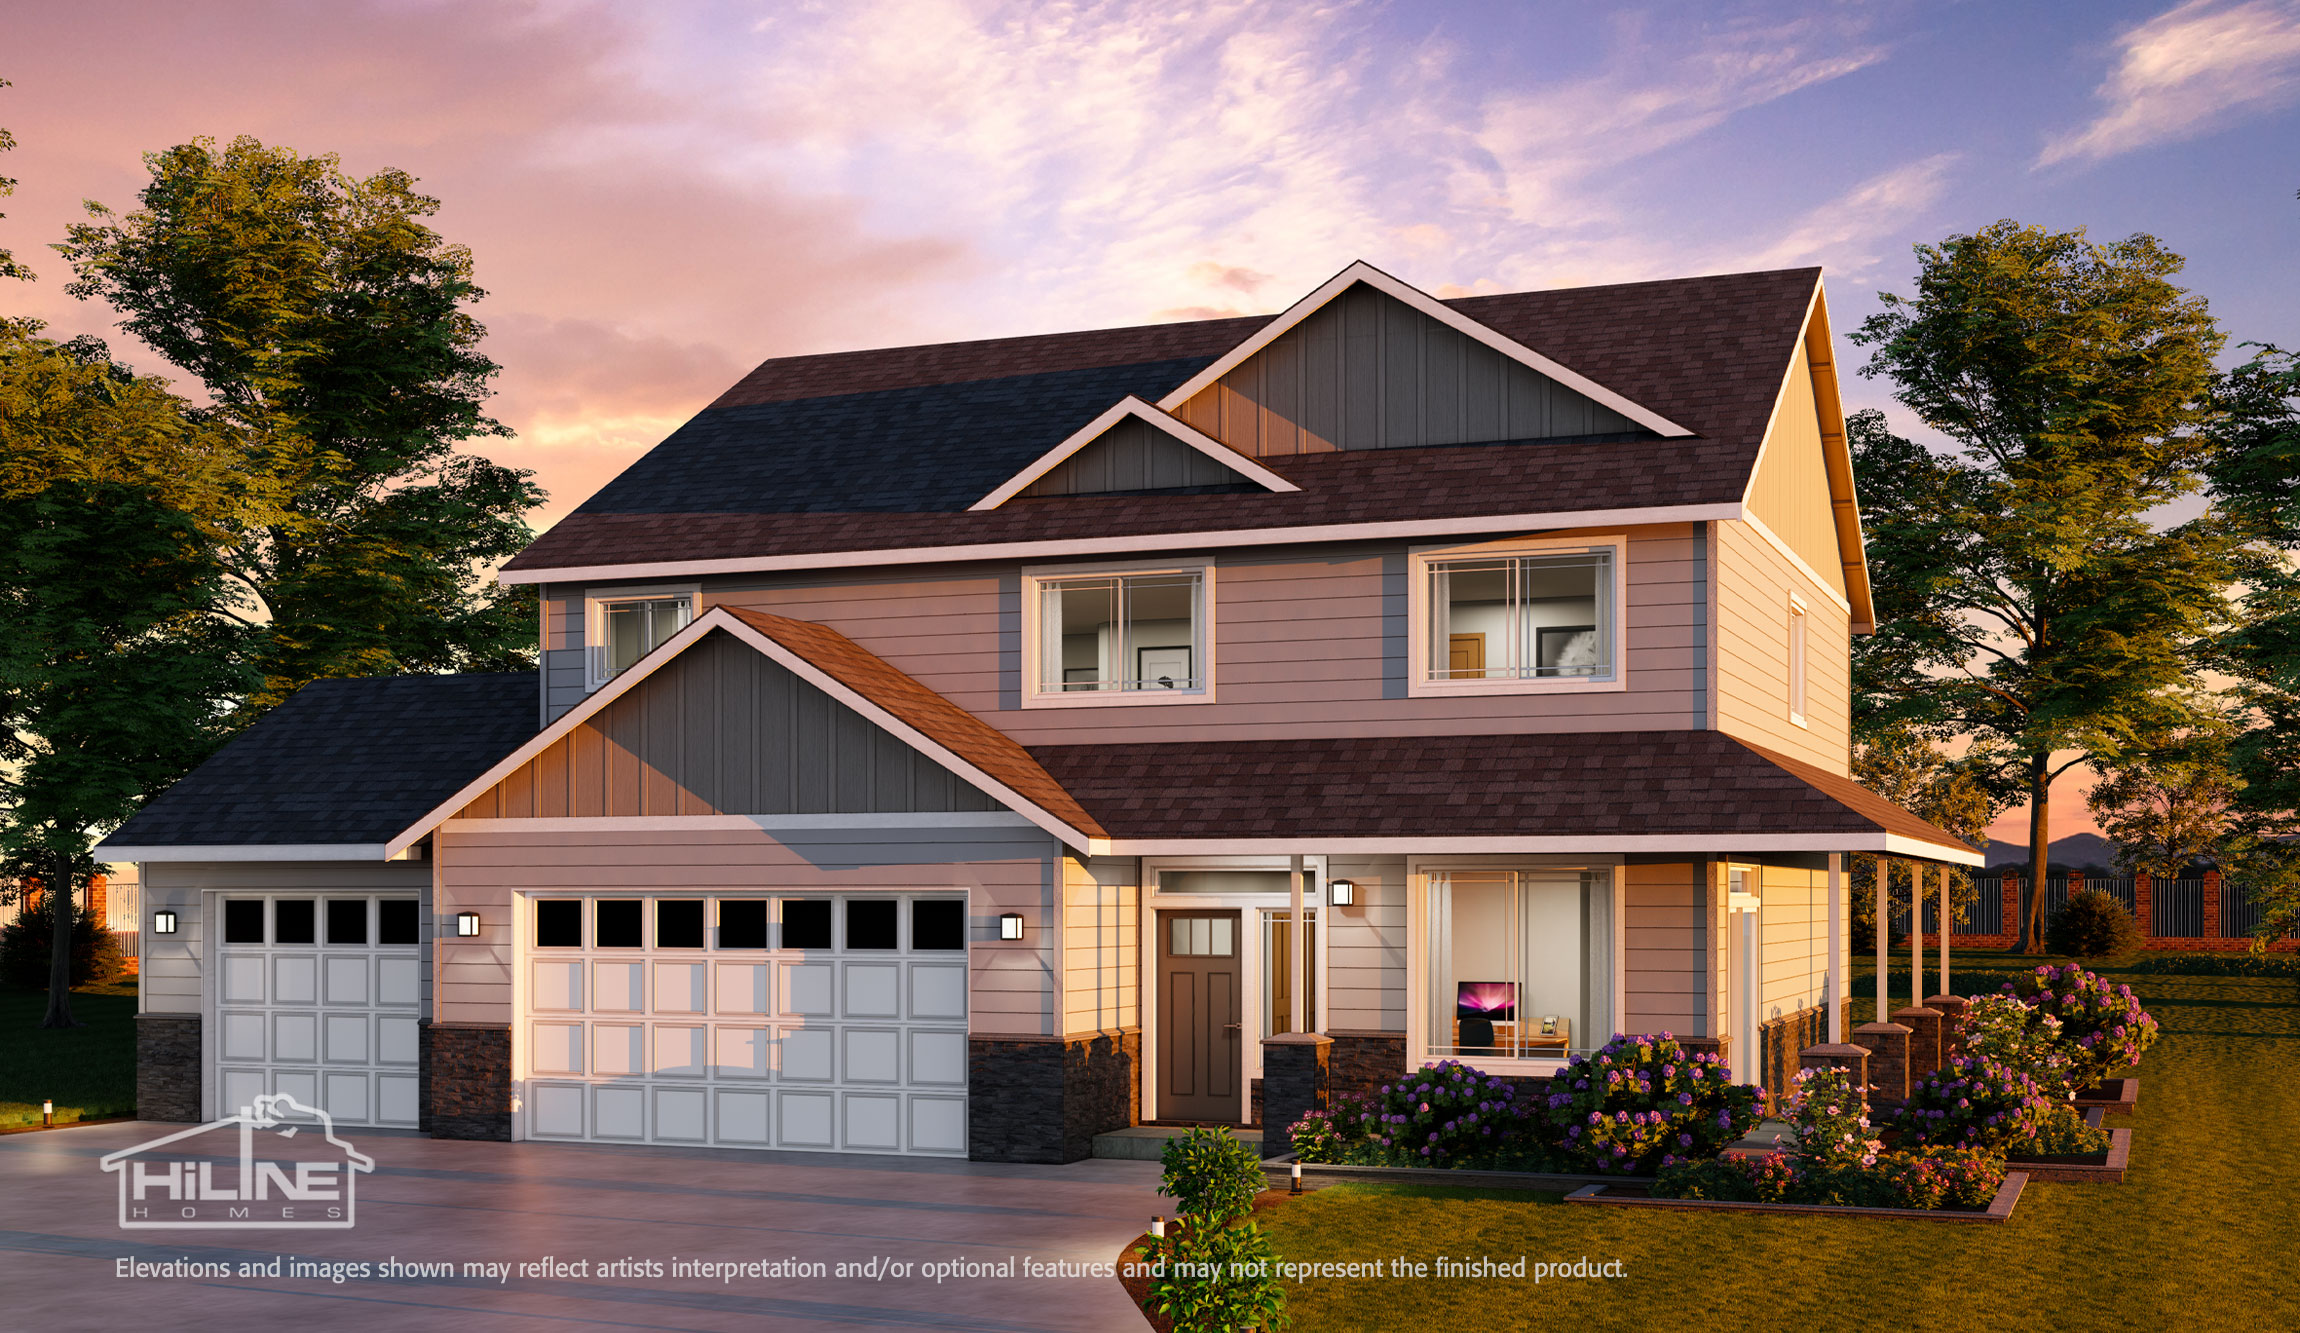 Image of Home Plan 2373 Enhanced Rendering with a third bay garage.